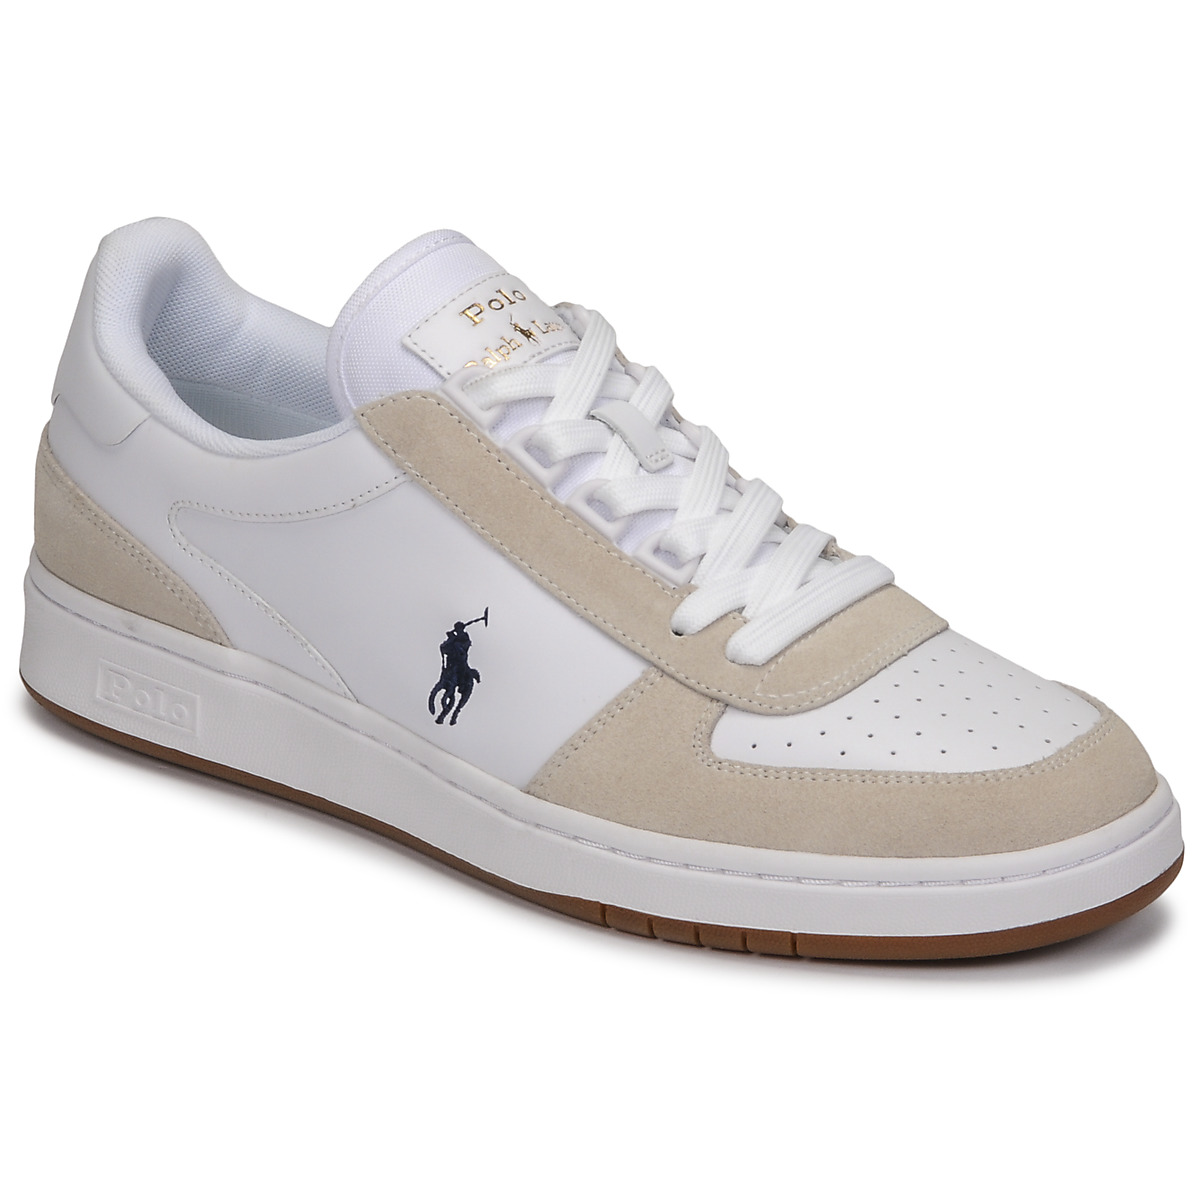 Polo Ralph Lauren Polo Crt Pp-sneakers-athletic Shoe White